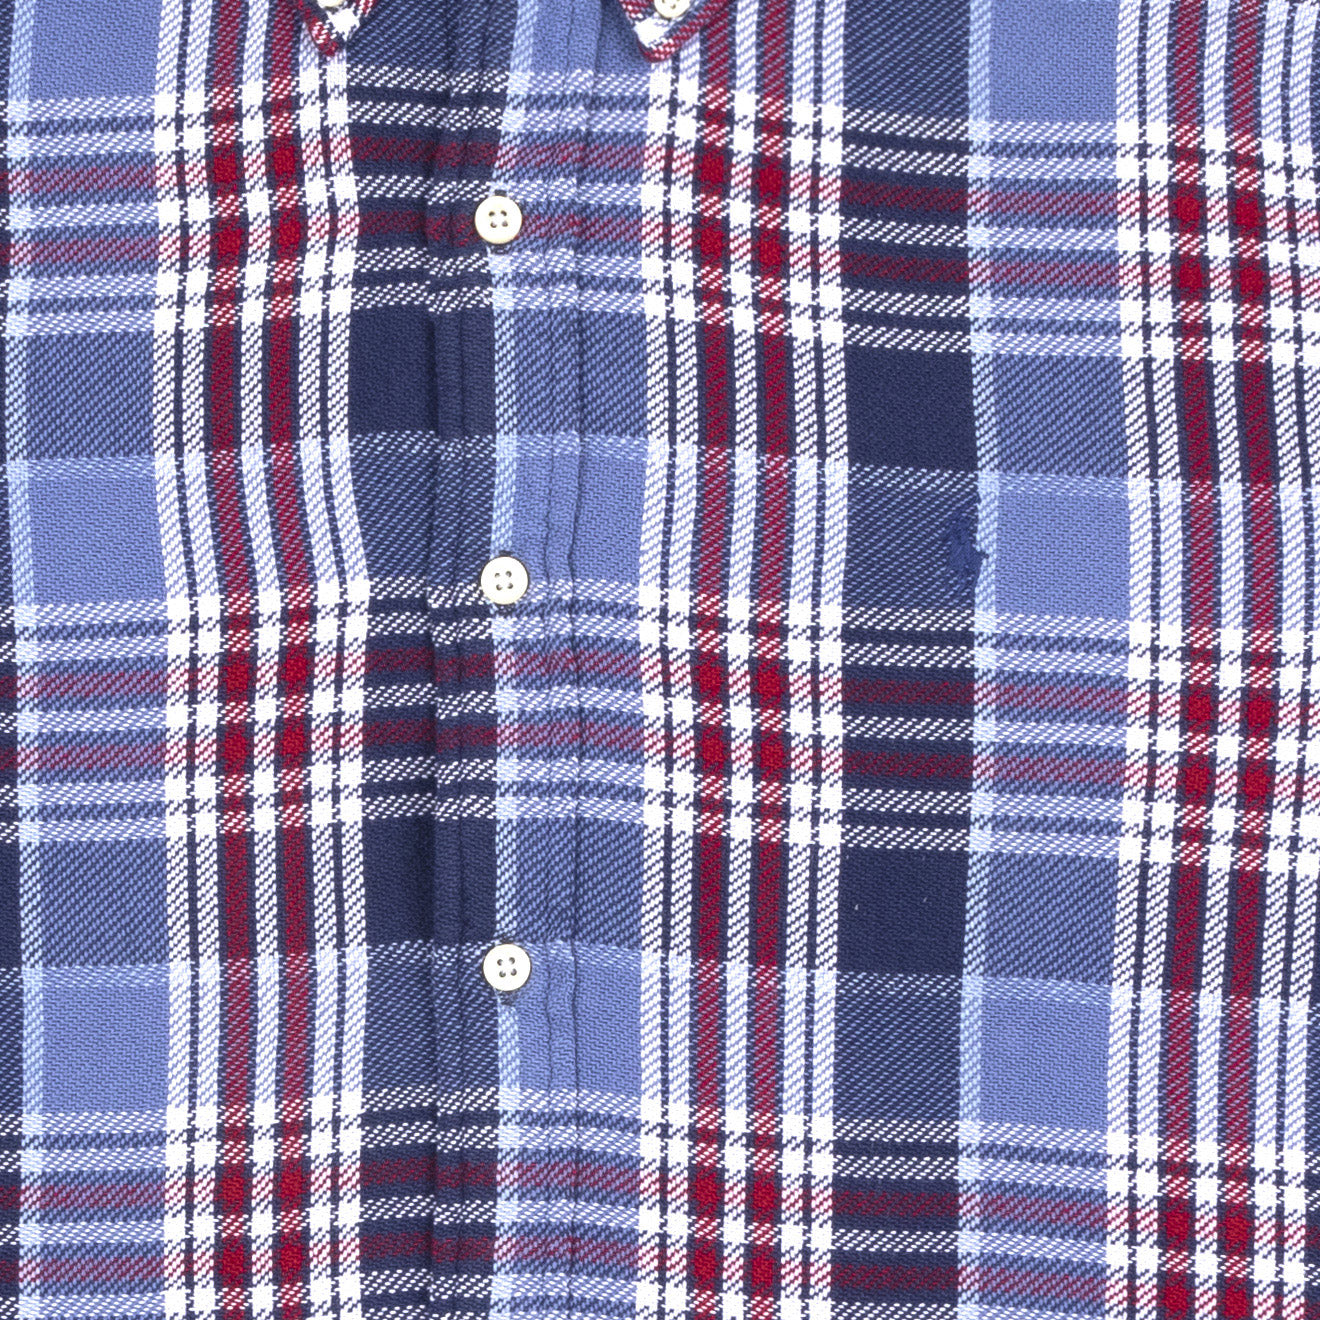 Polo Ralph Lauren Outdoor Flannel Shirt Blue / Red | The Sporting Lodge